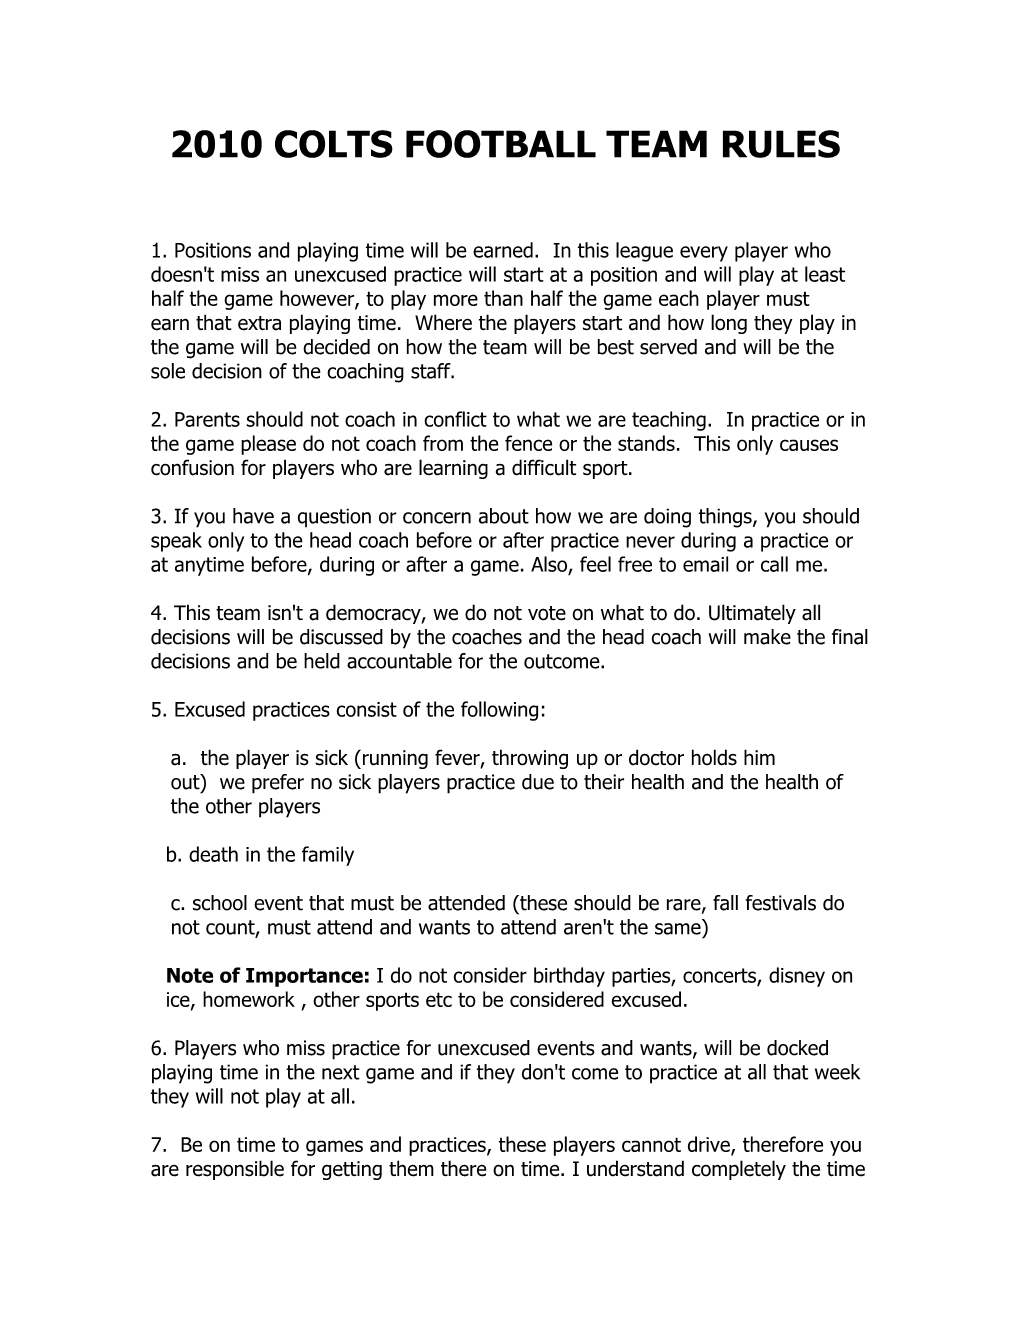 2010 Colts Football Team Rules